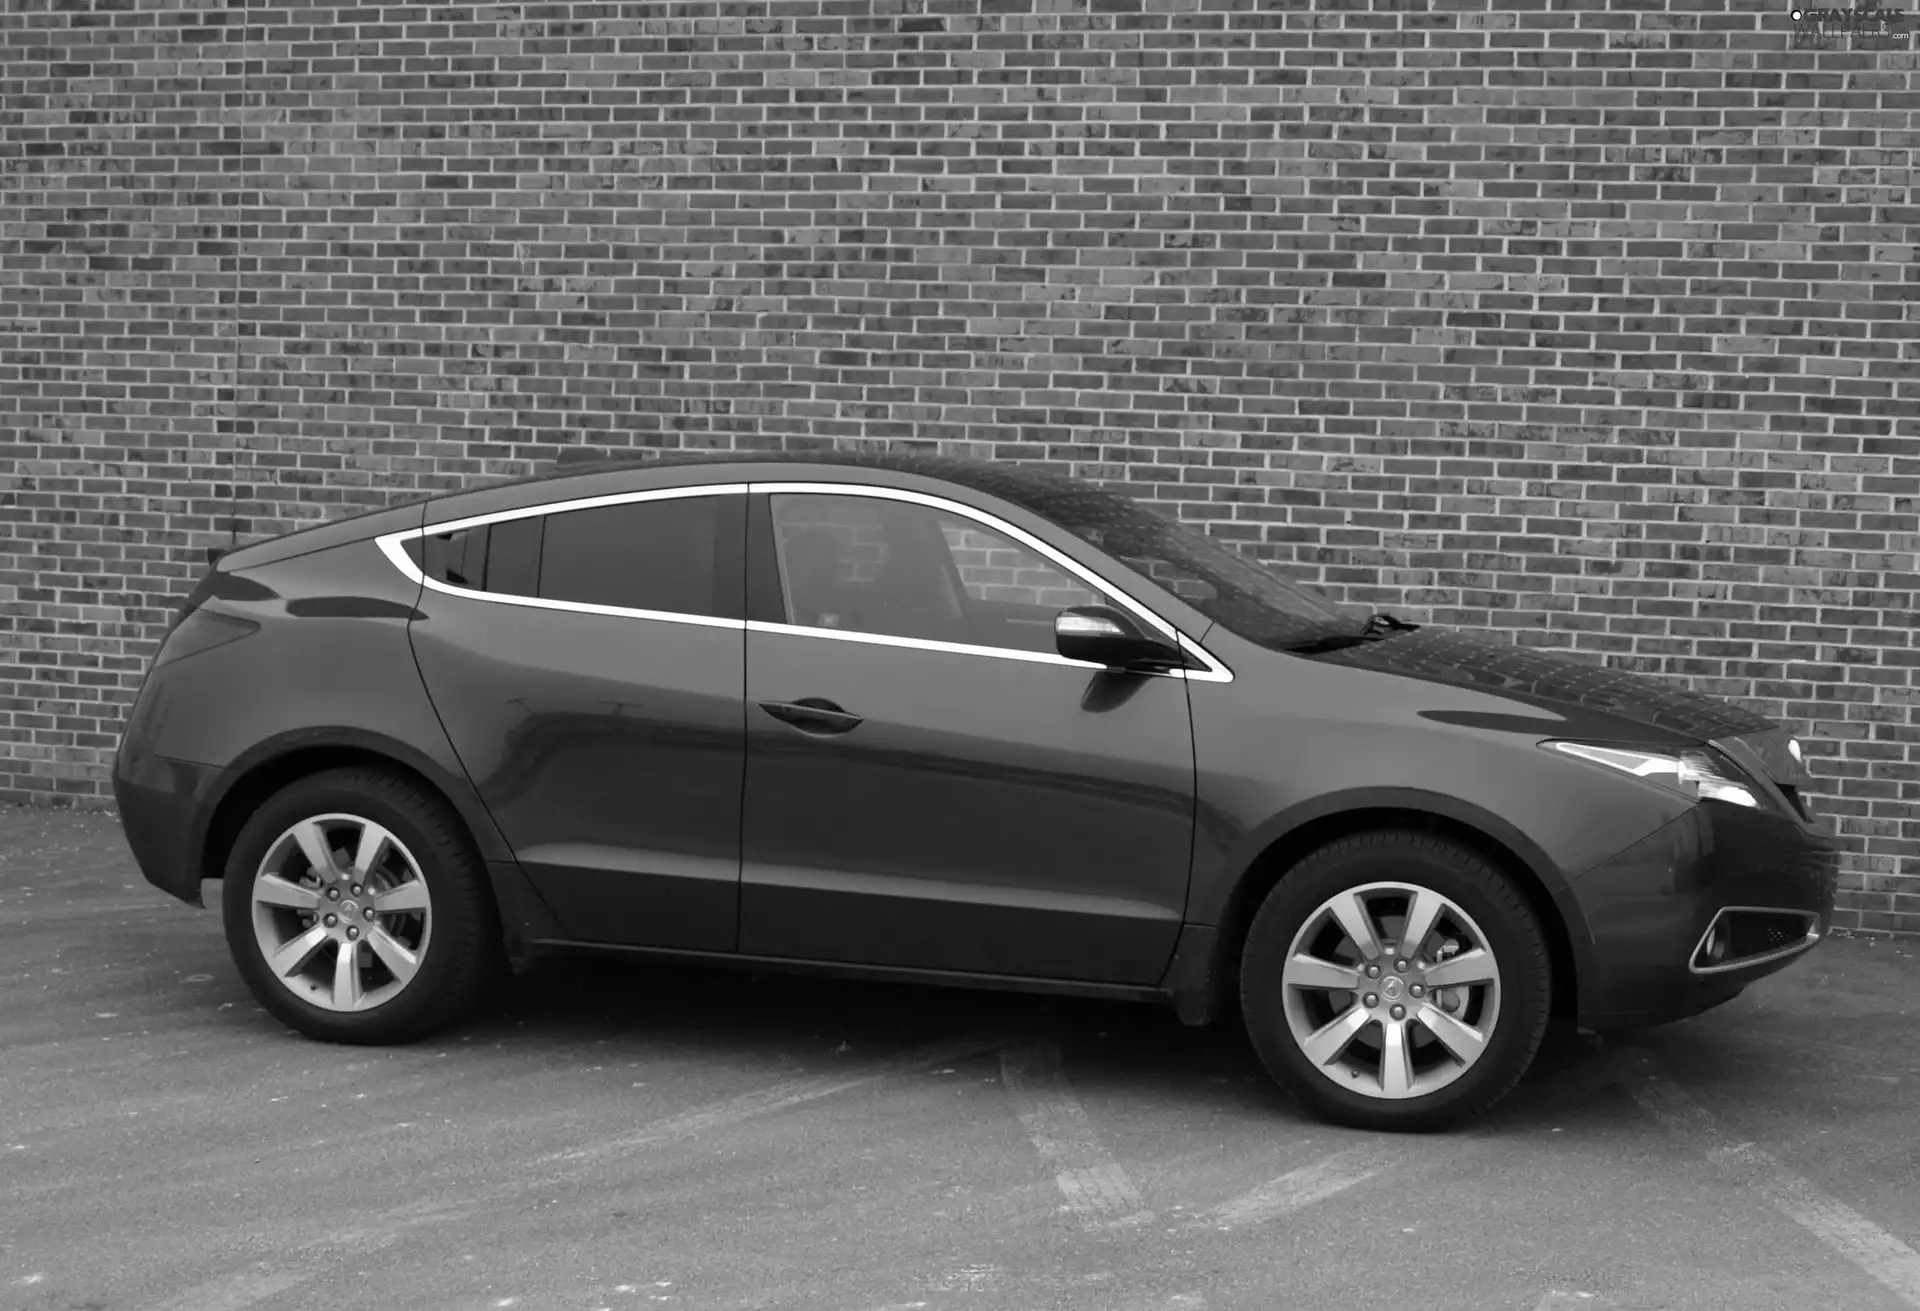 Acura ZDX, right, side